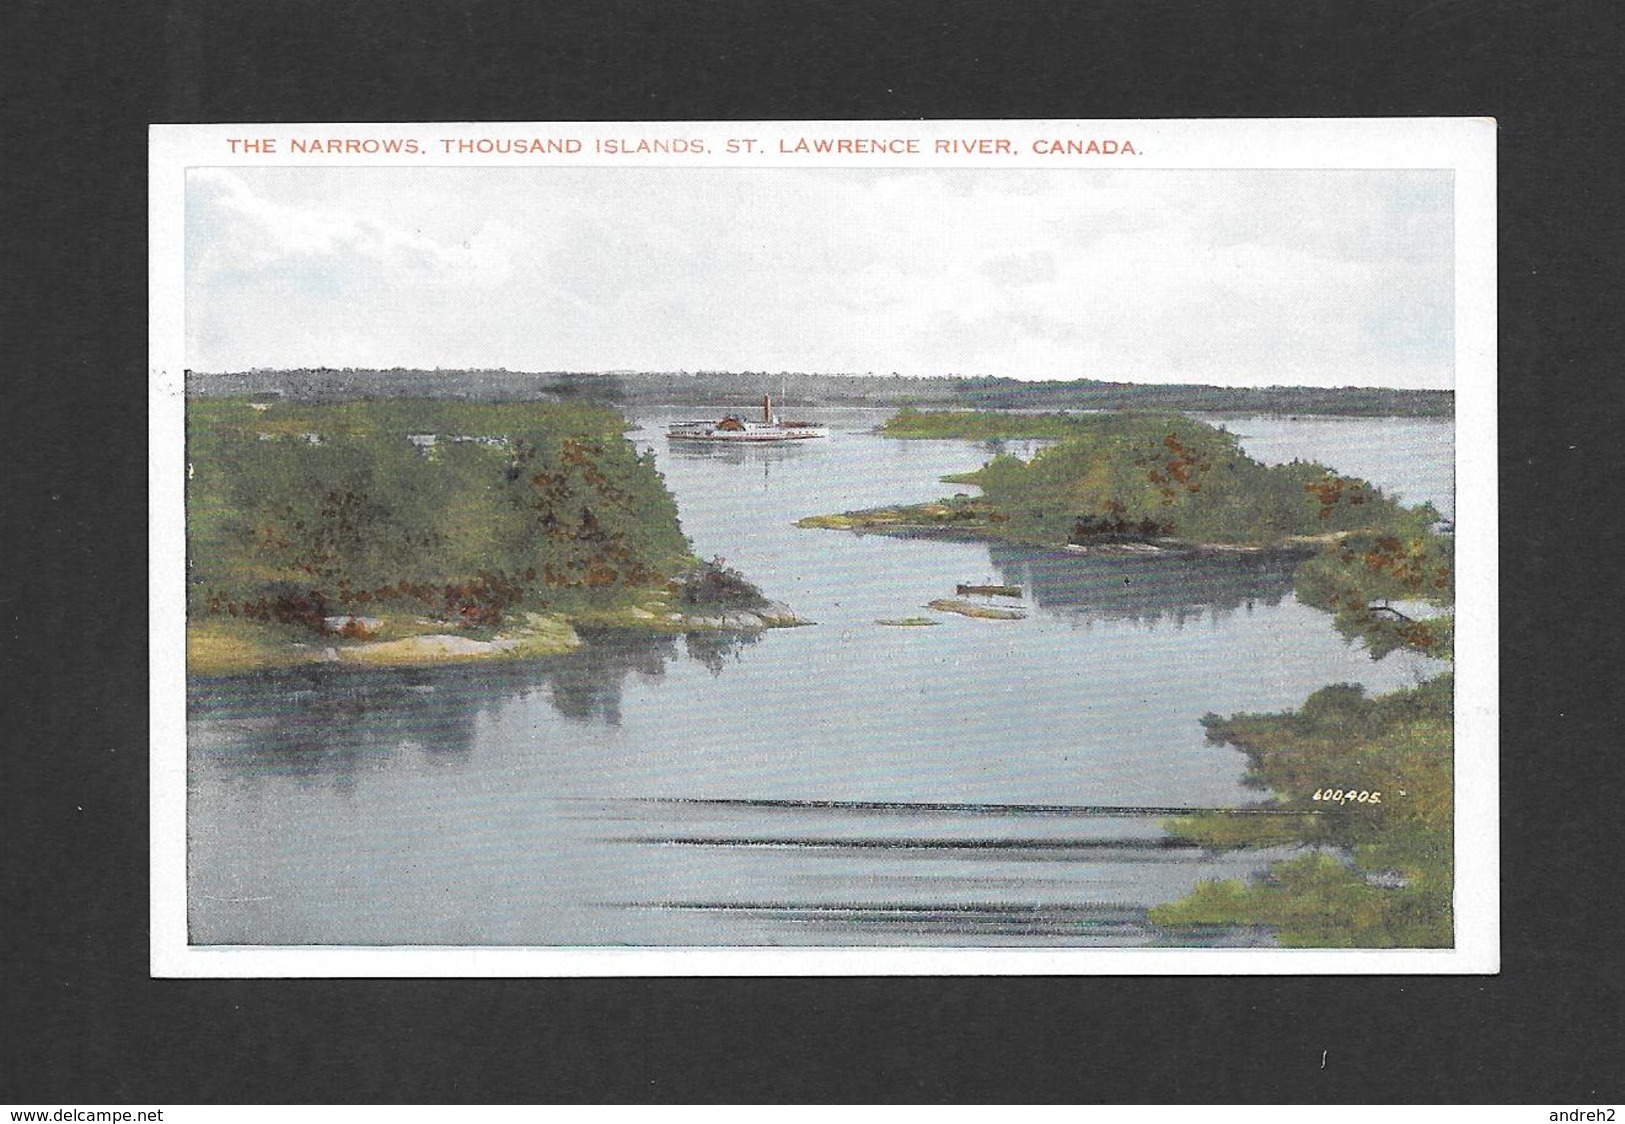 THE NARROWS - THOUSAND ISLANDS - ONTARIO - ST LAWRENCE RIVER - BY VALENTINE BLACK - Thousand Islands